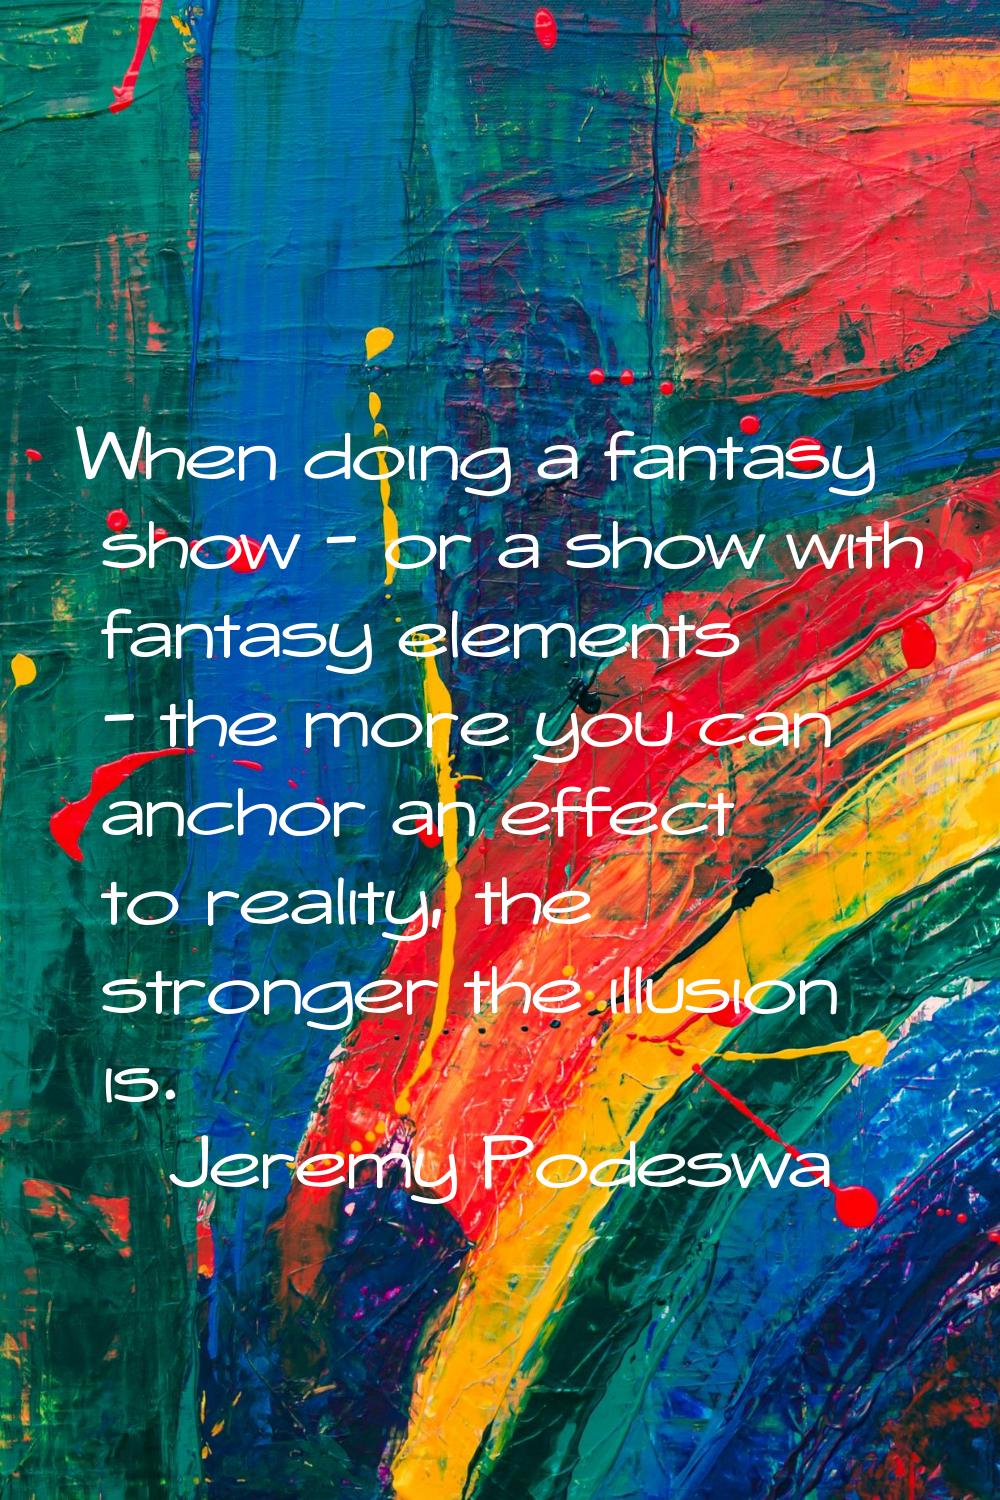 When doing a fantasy show - or a show with fantasy elements - the more you can anchor an effect to 